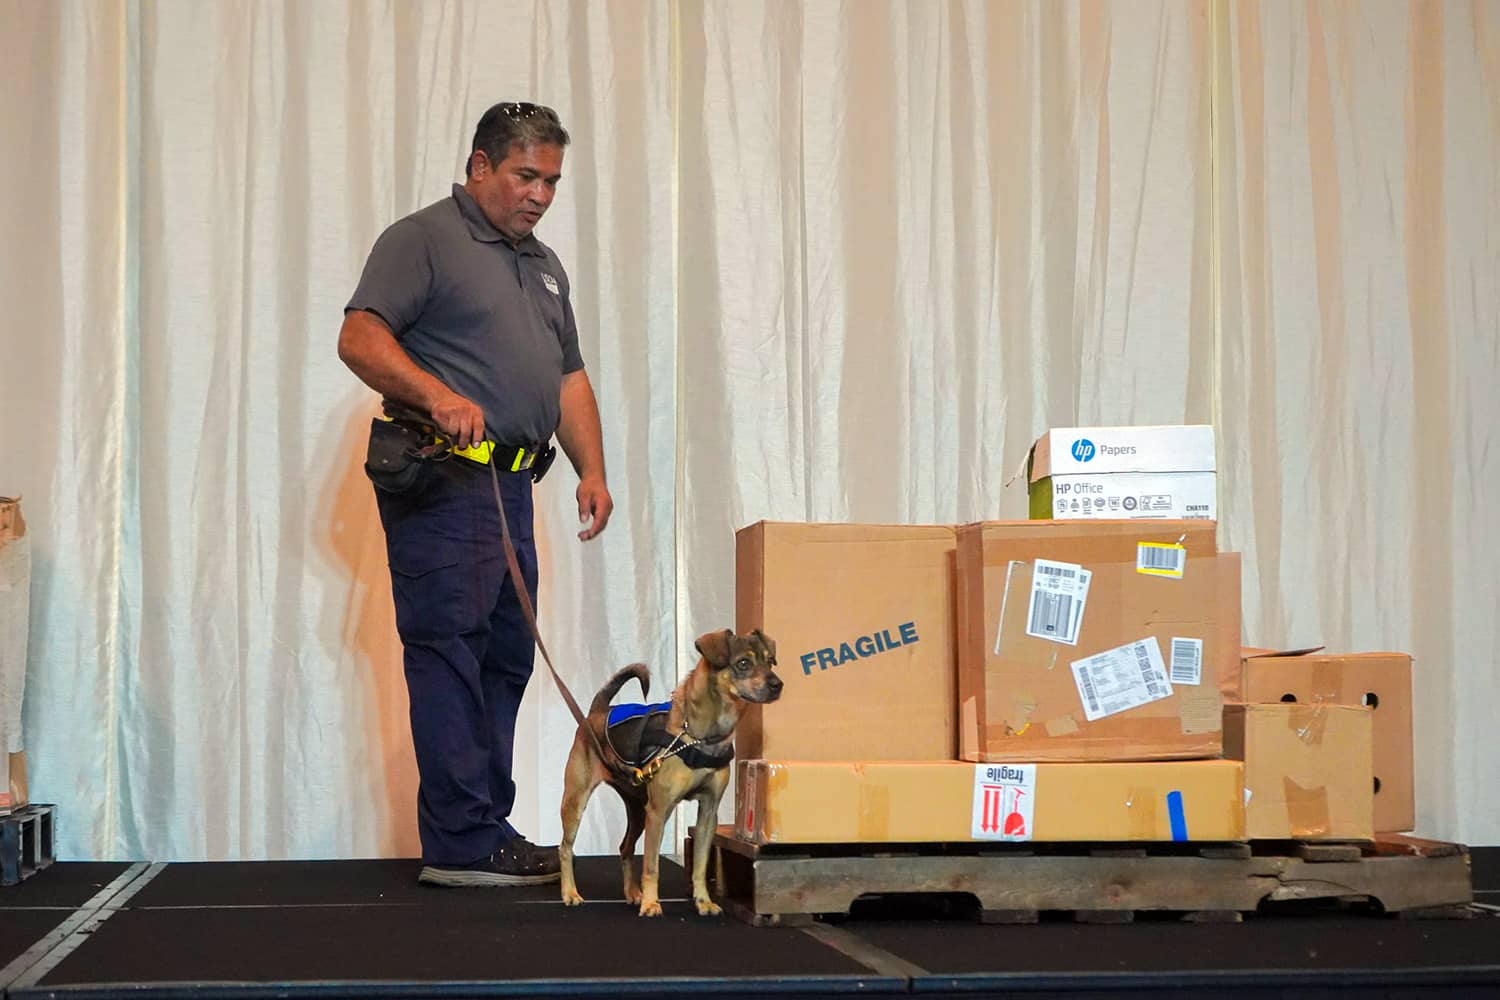 Photo of the detector dog demonstration